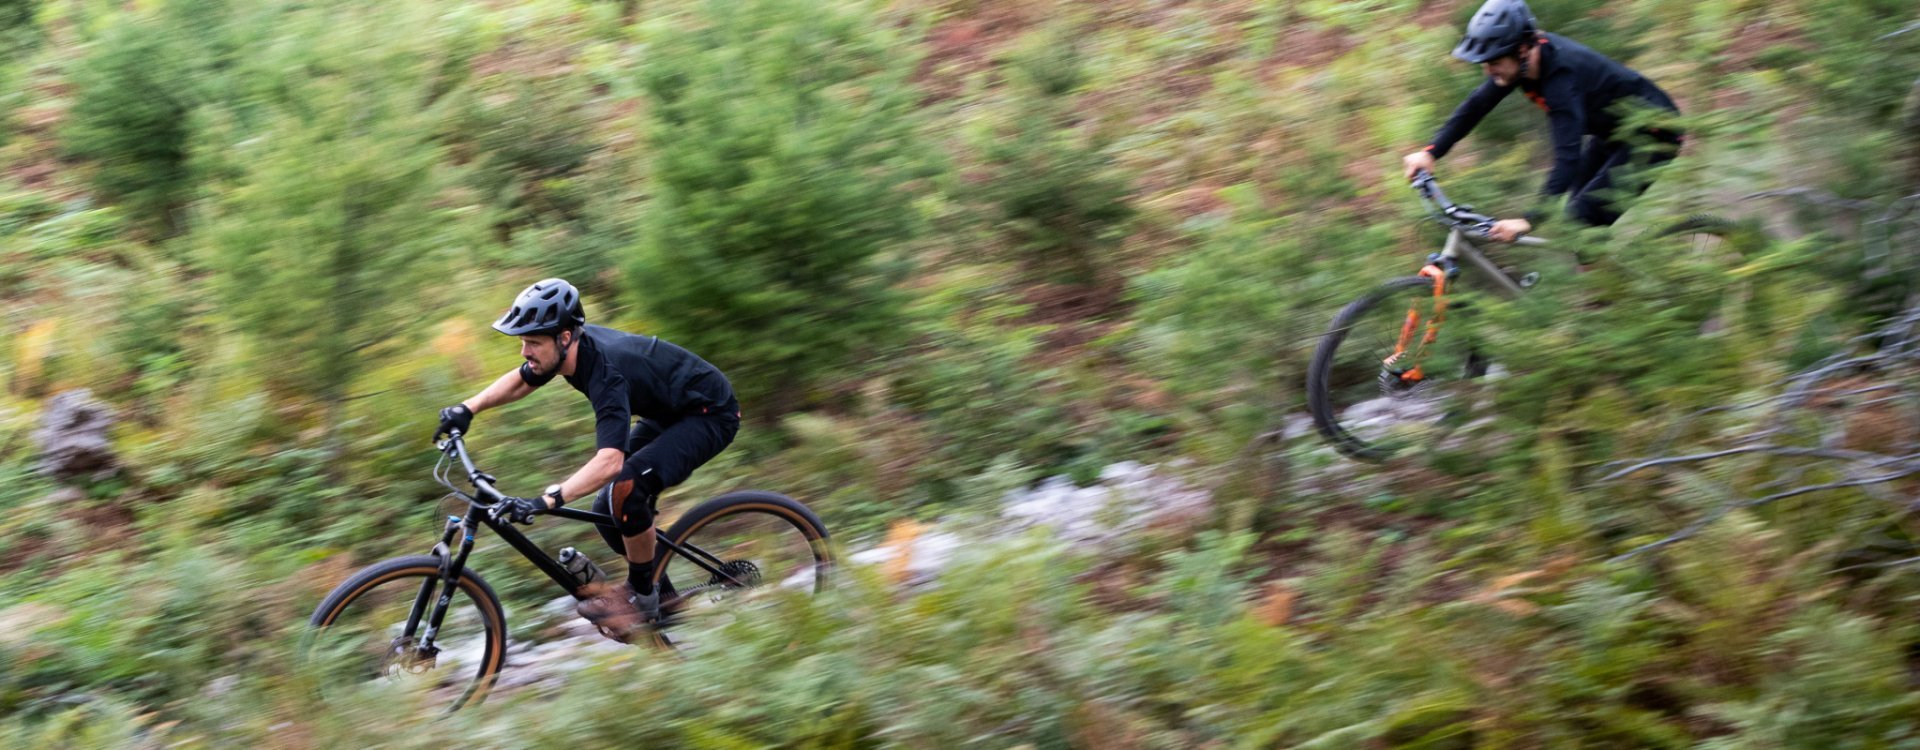 Georg and Chris from the bc Team descend a hill on their bc original Podsol bikes.